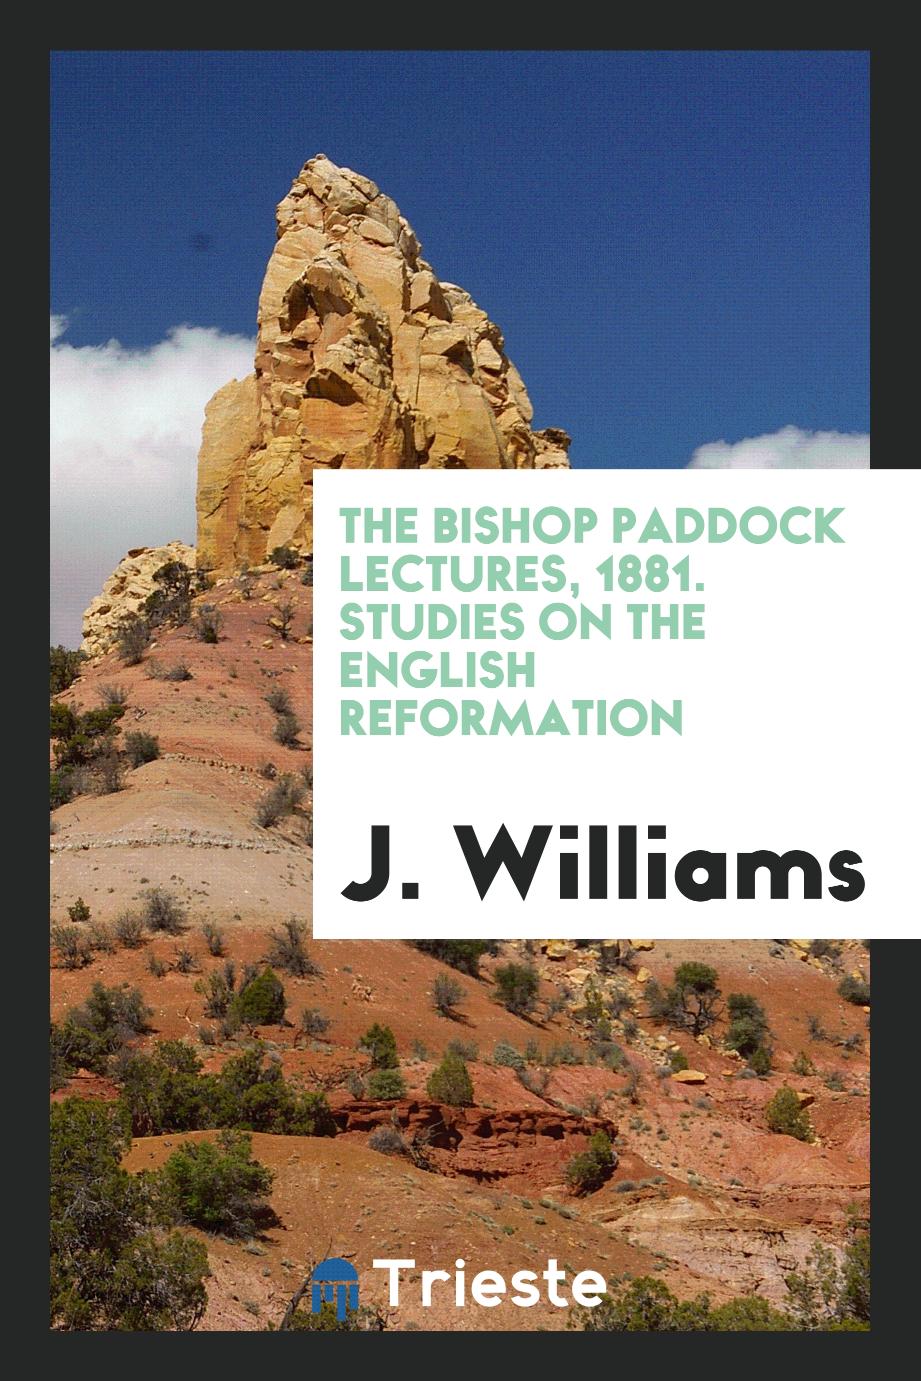 The Bishop Paddock Lectures, 1881. Studies on the English Reformation